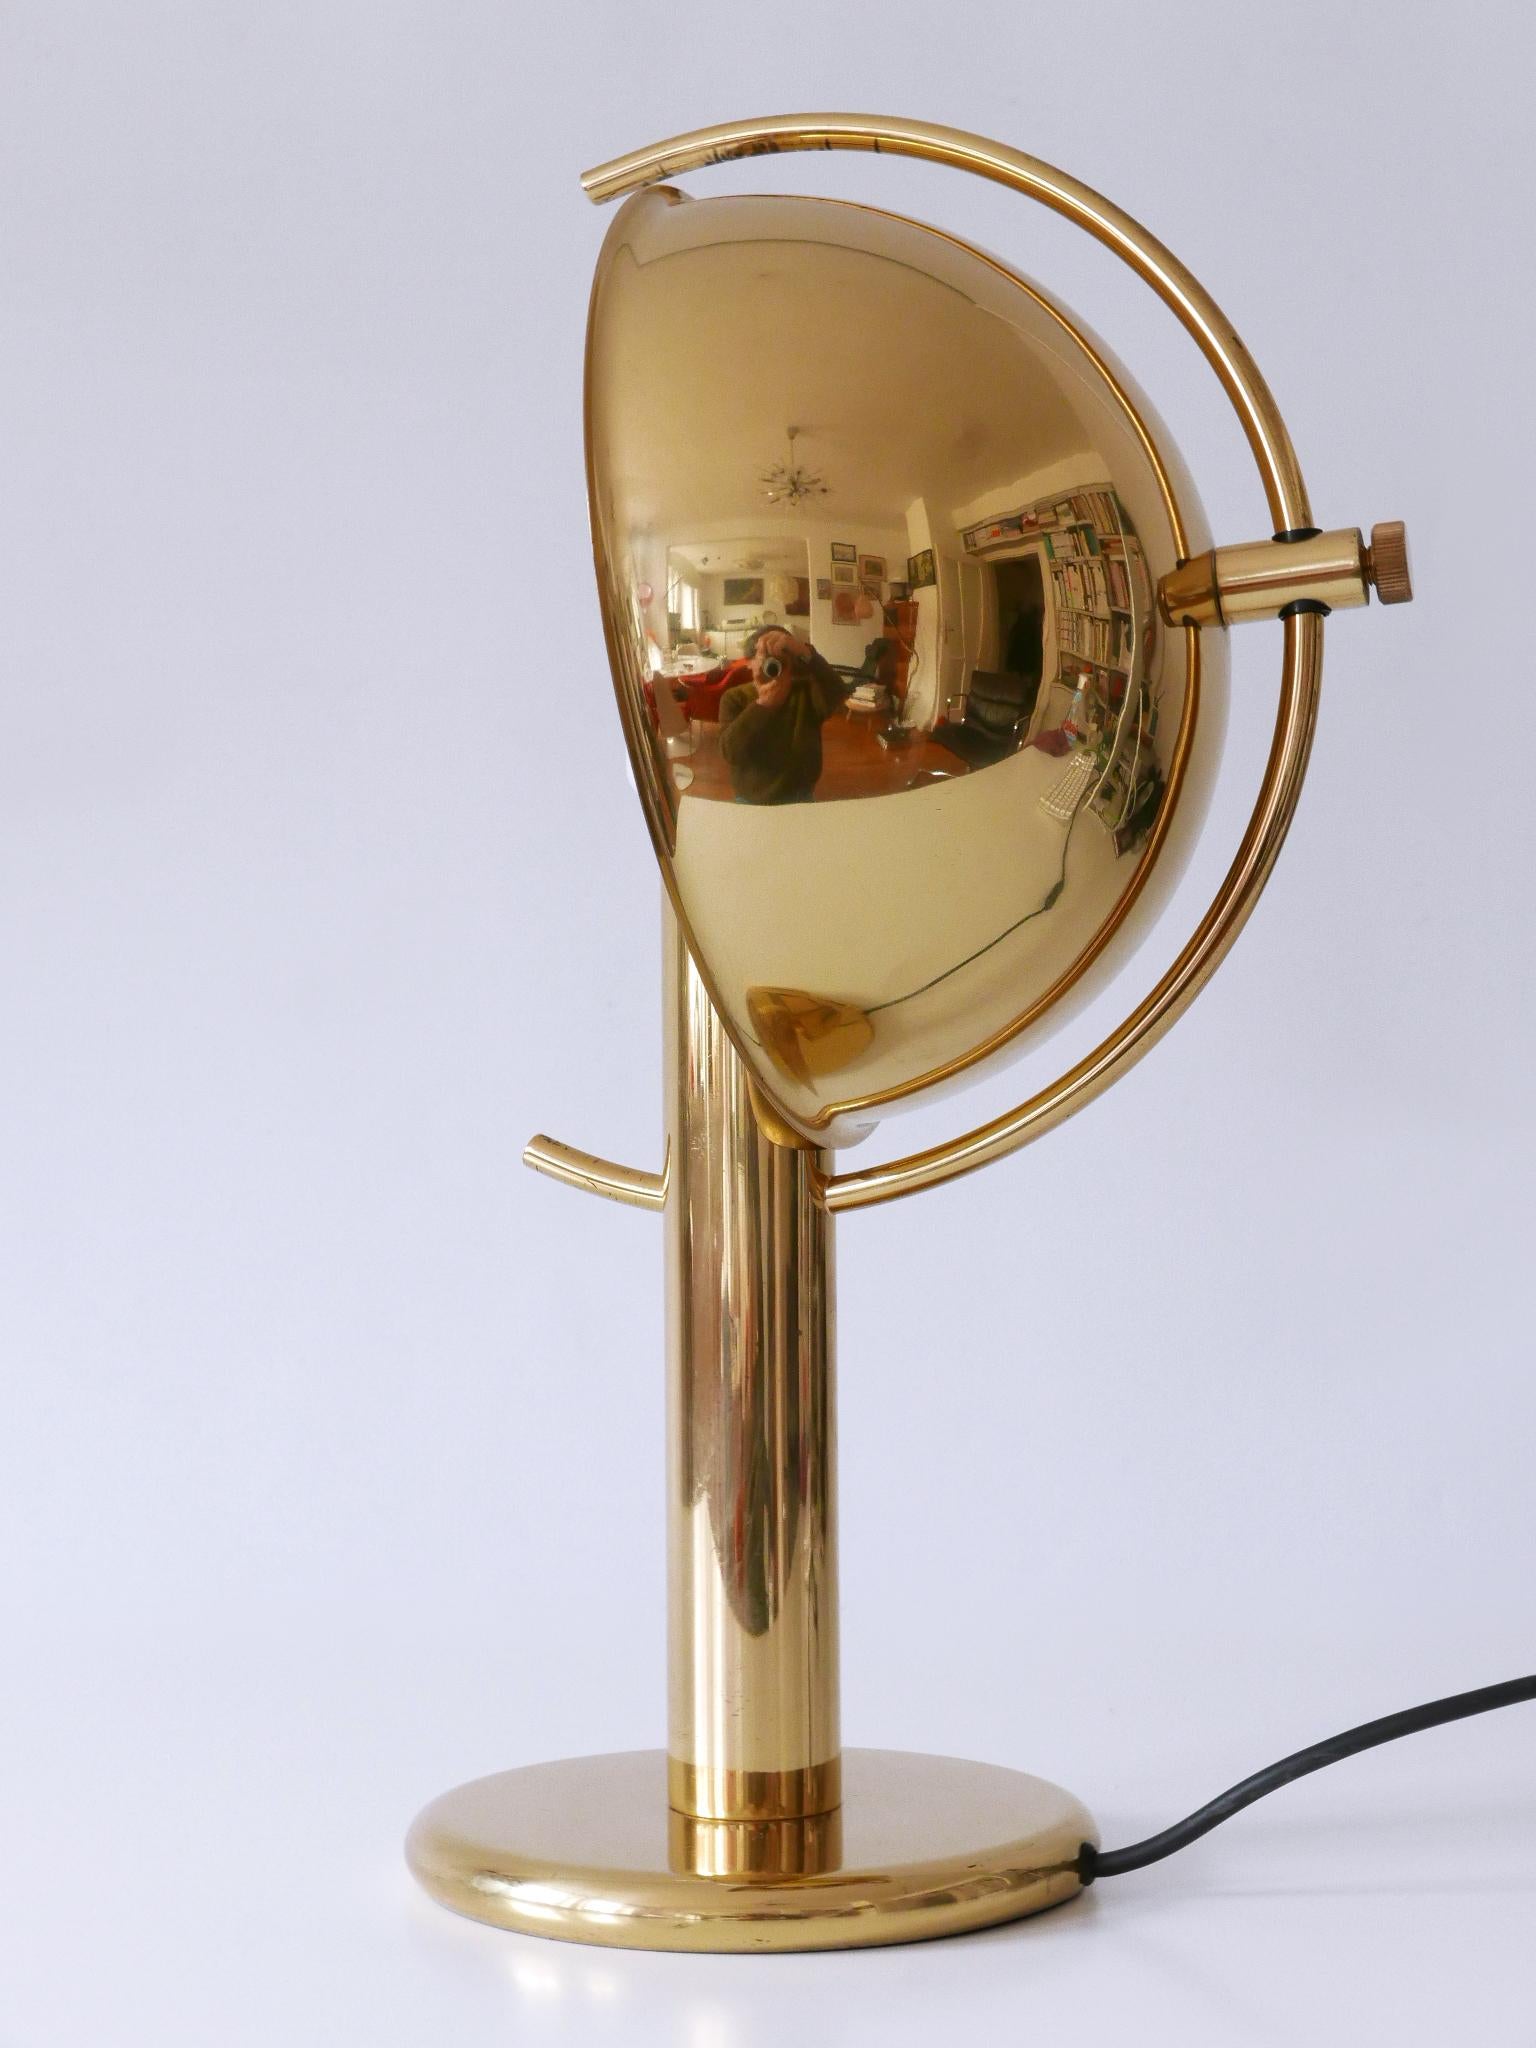 Exceptional Mid-Century Modern Brass Table Lamp by Gebrüder Cosack Germany 1960s For Sale 9